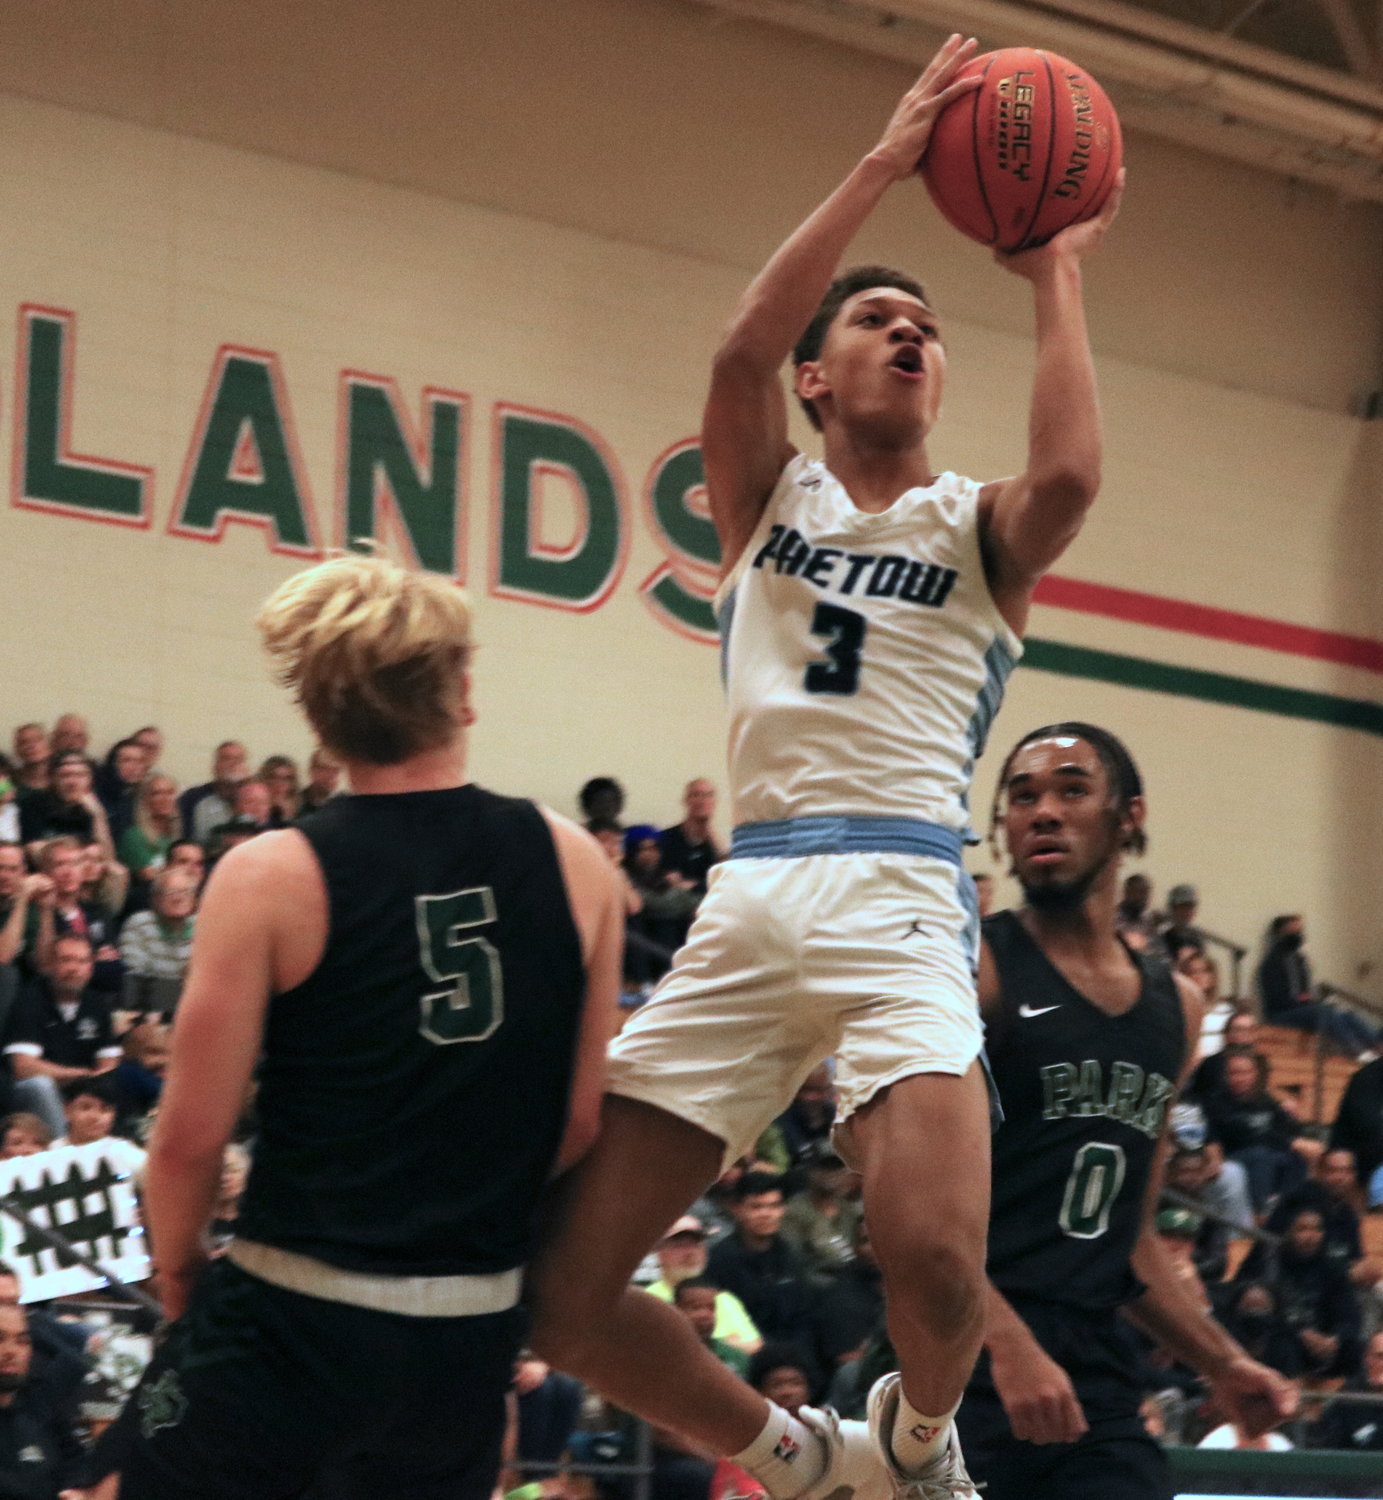 Kam Ingram shoots a floater during Monday’s game between Paetow and Kingwood Park at The Woodlands High School.